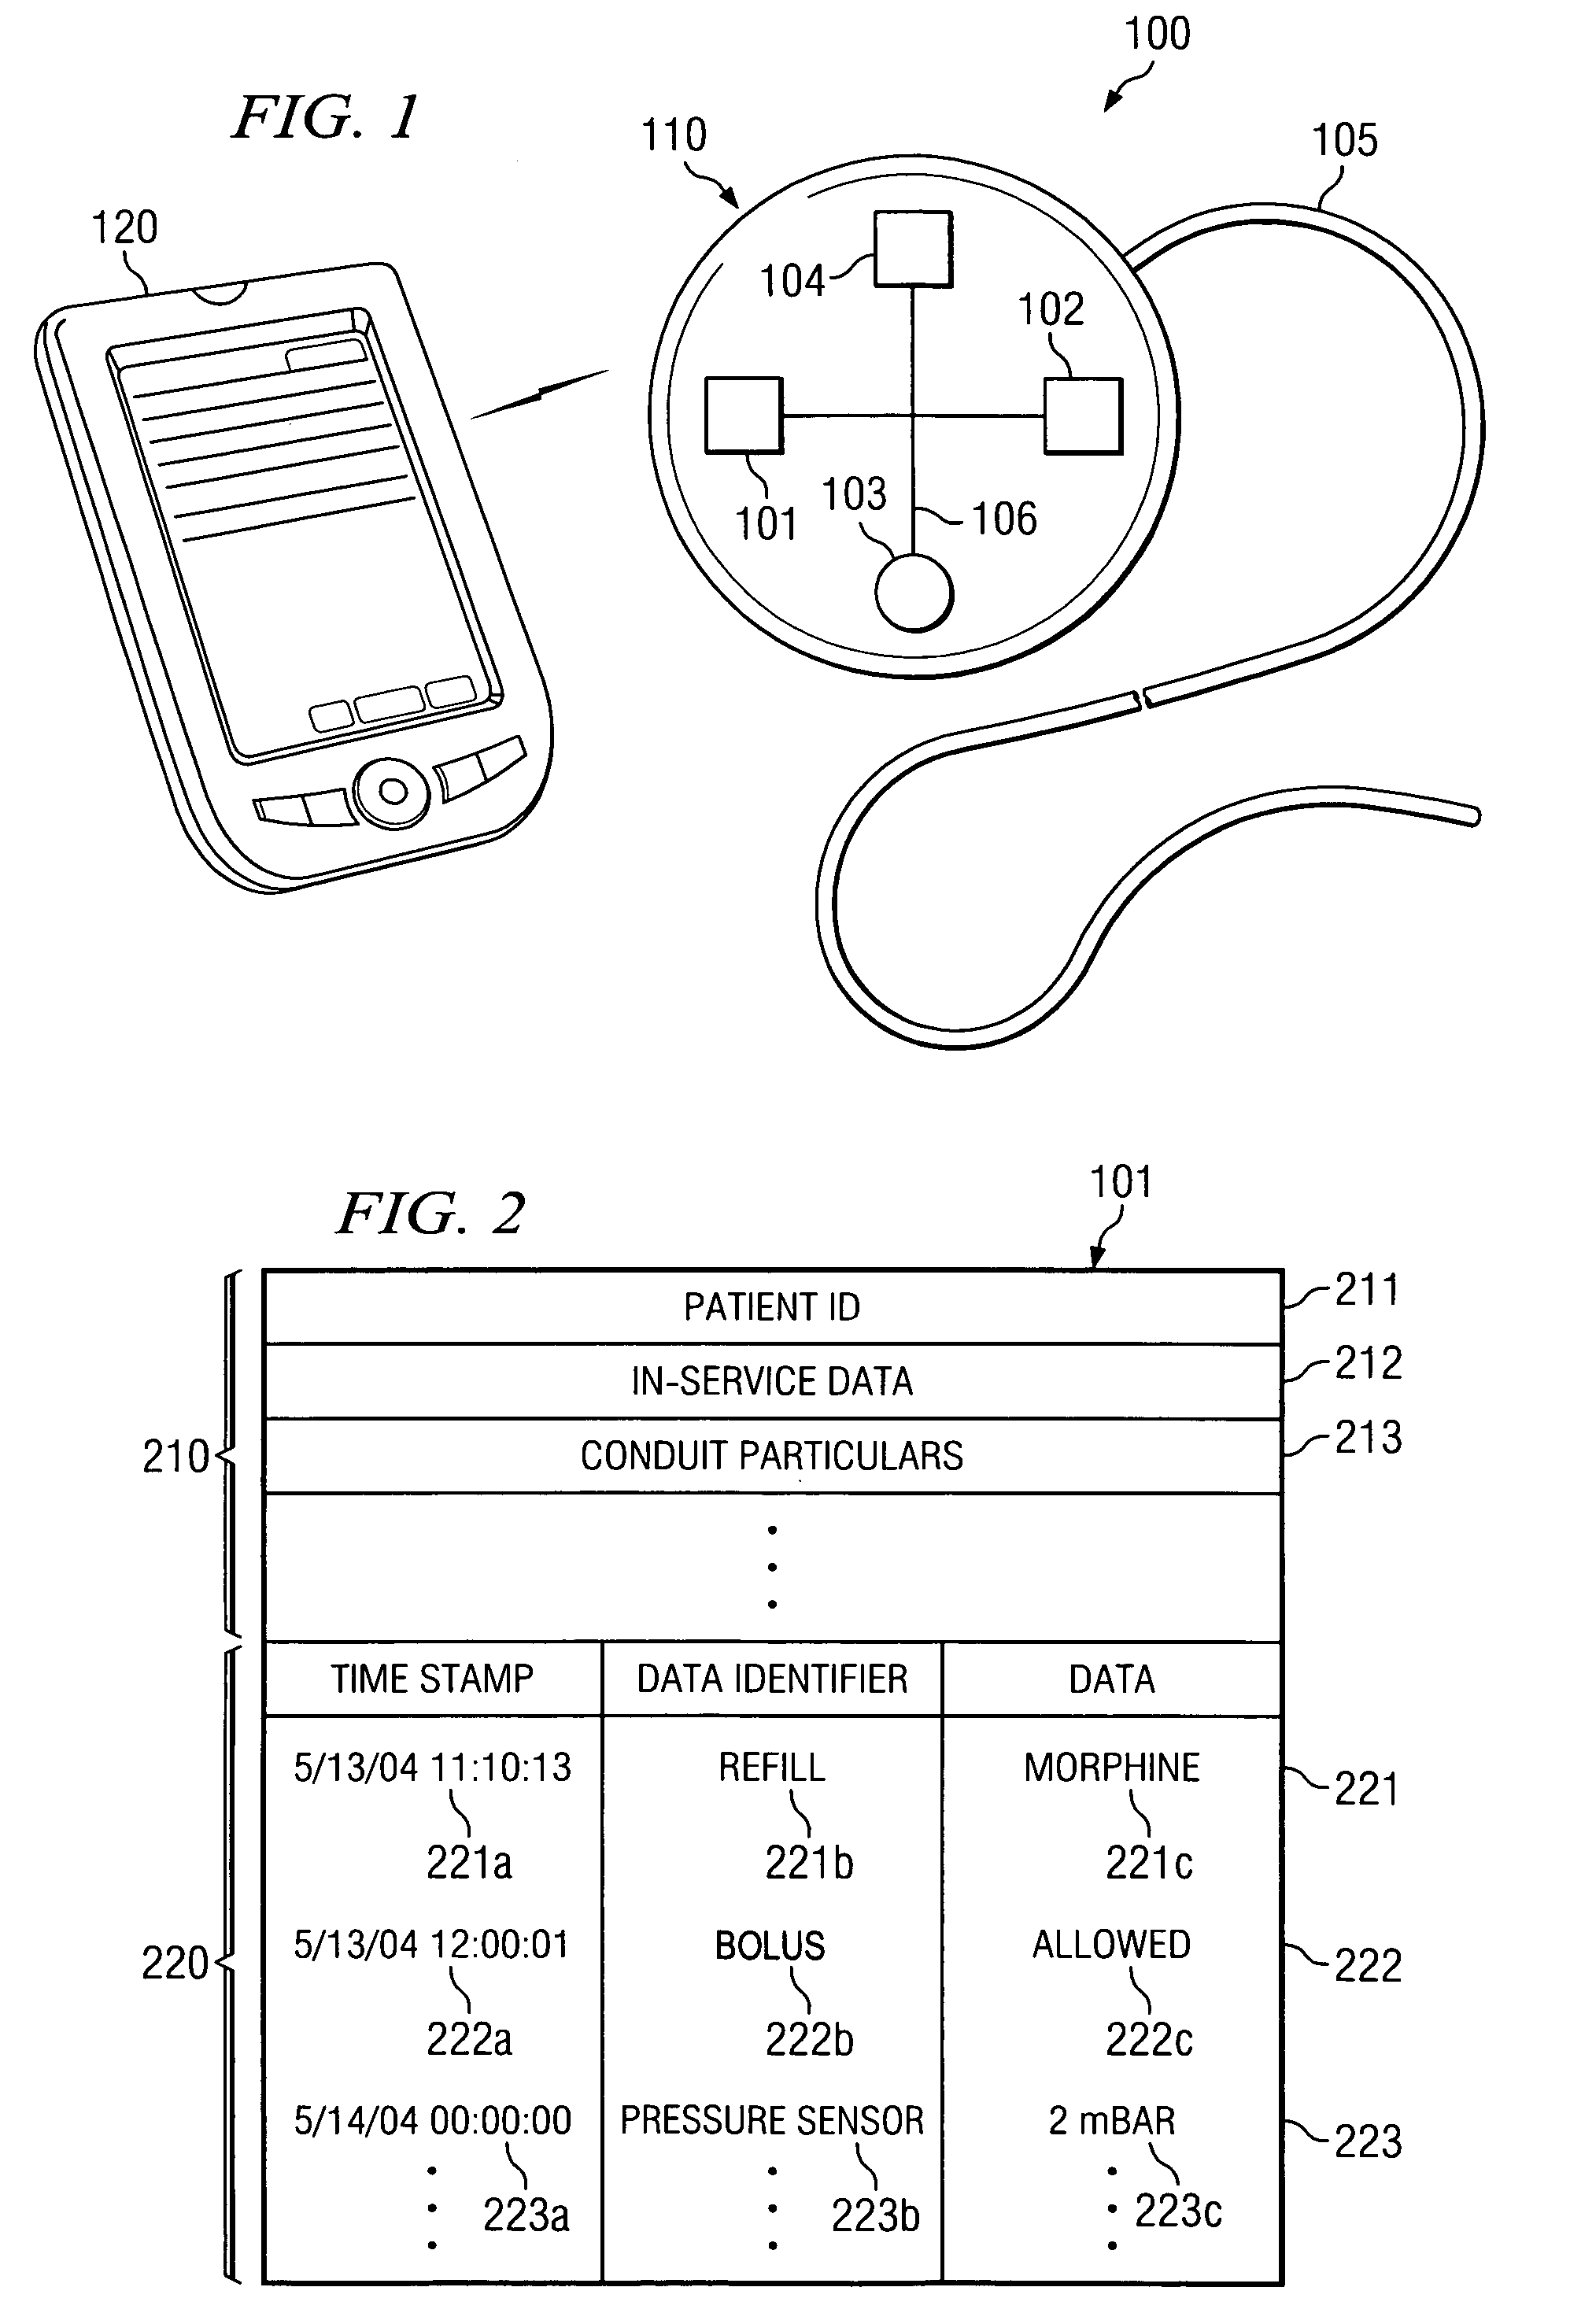 System and method of managing medical device historical data